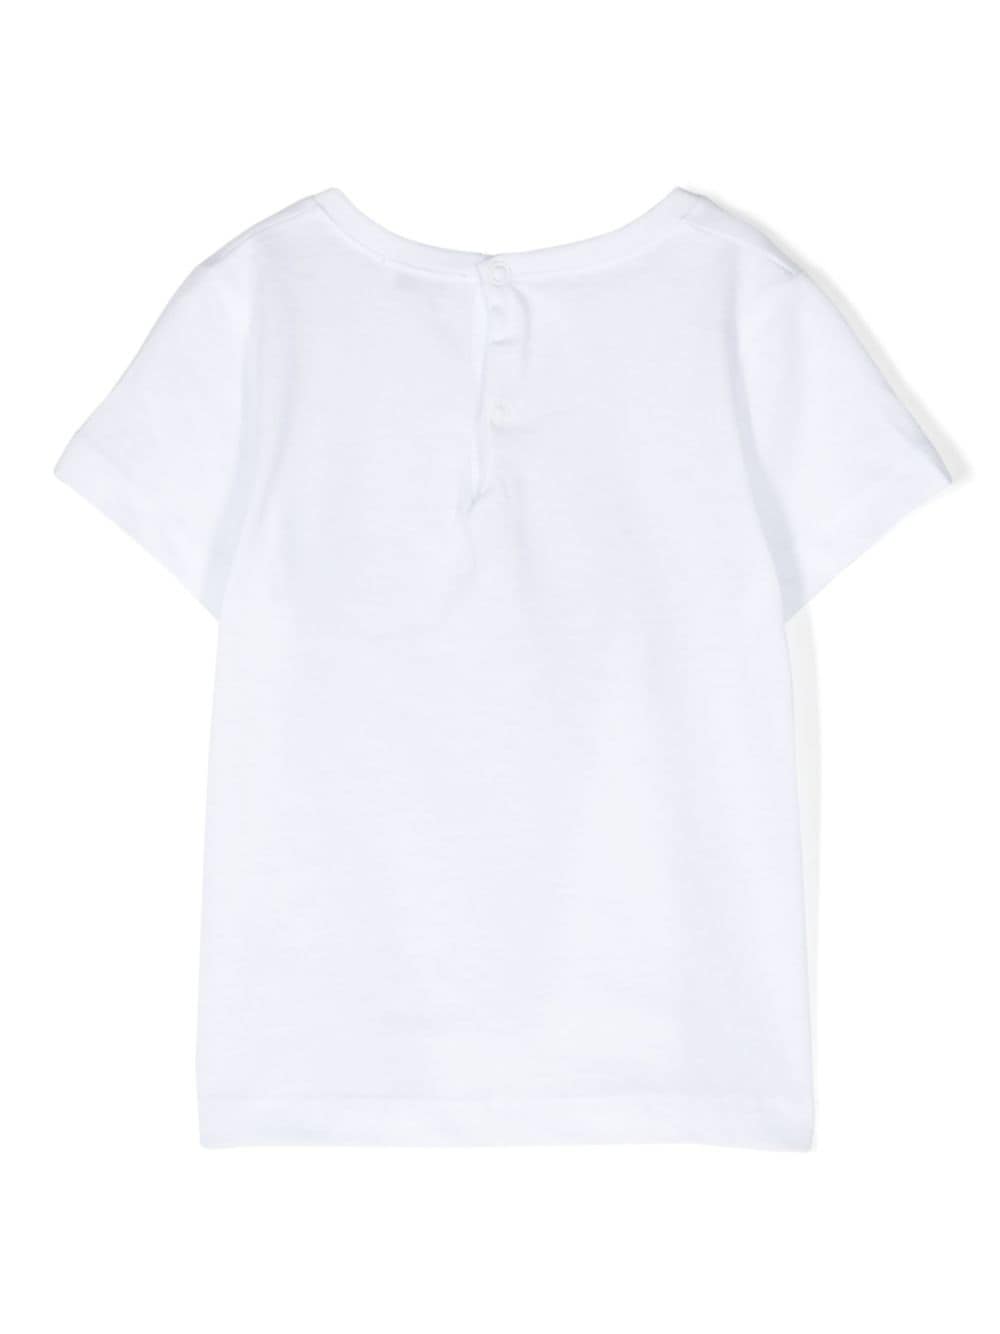 White t-shirt for baby girls with graphic print